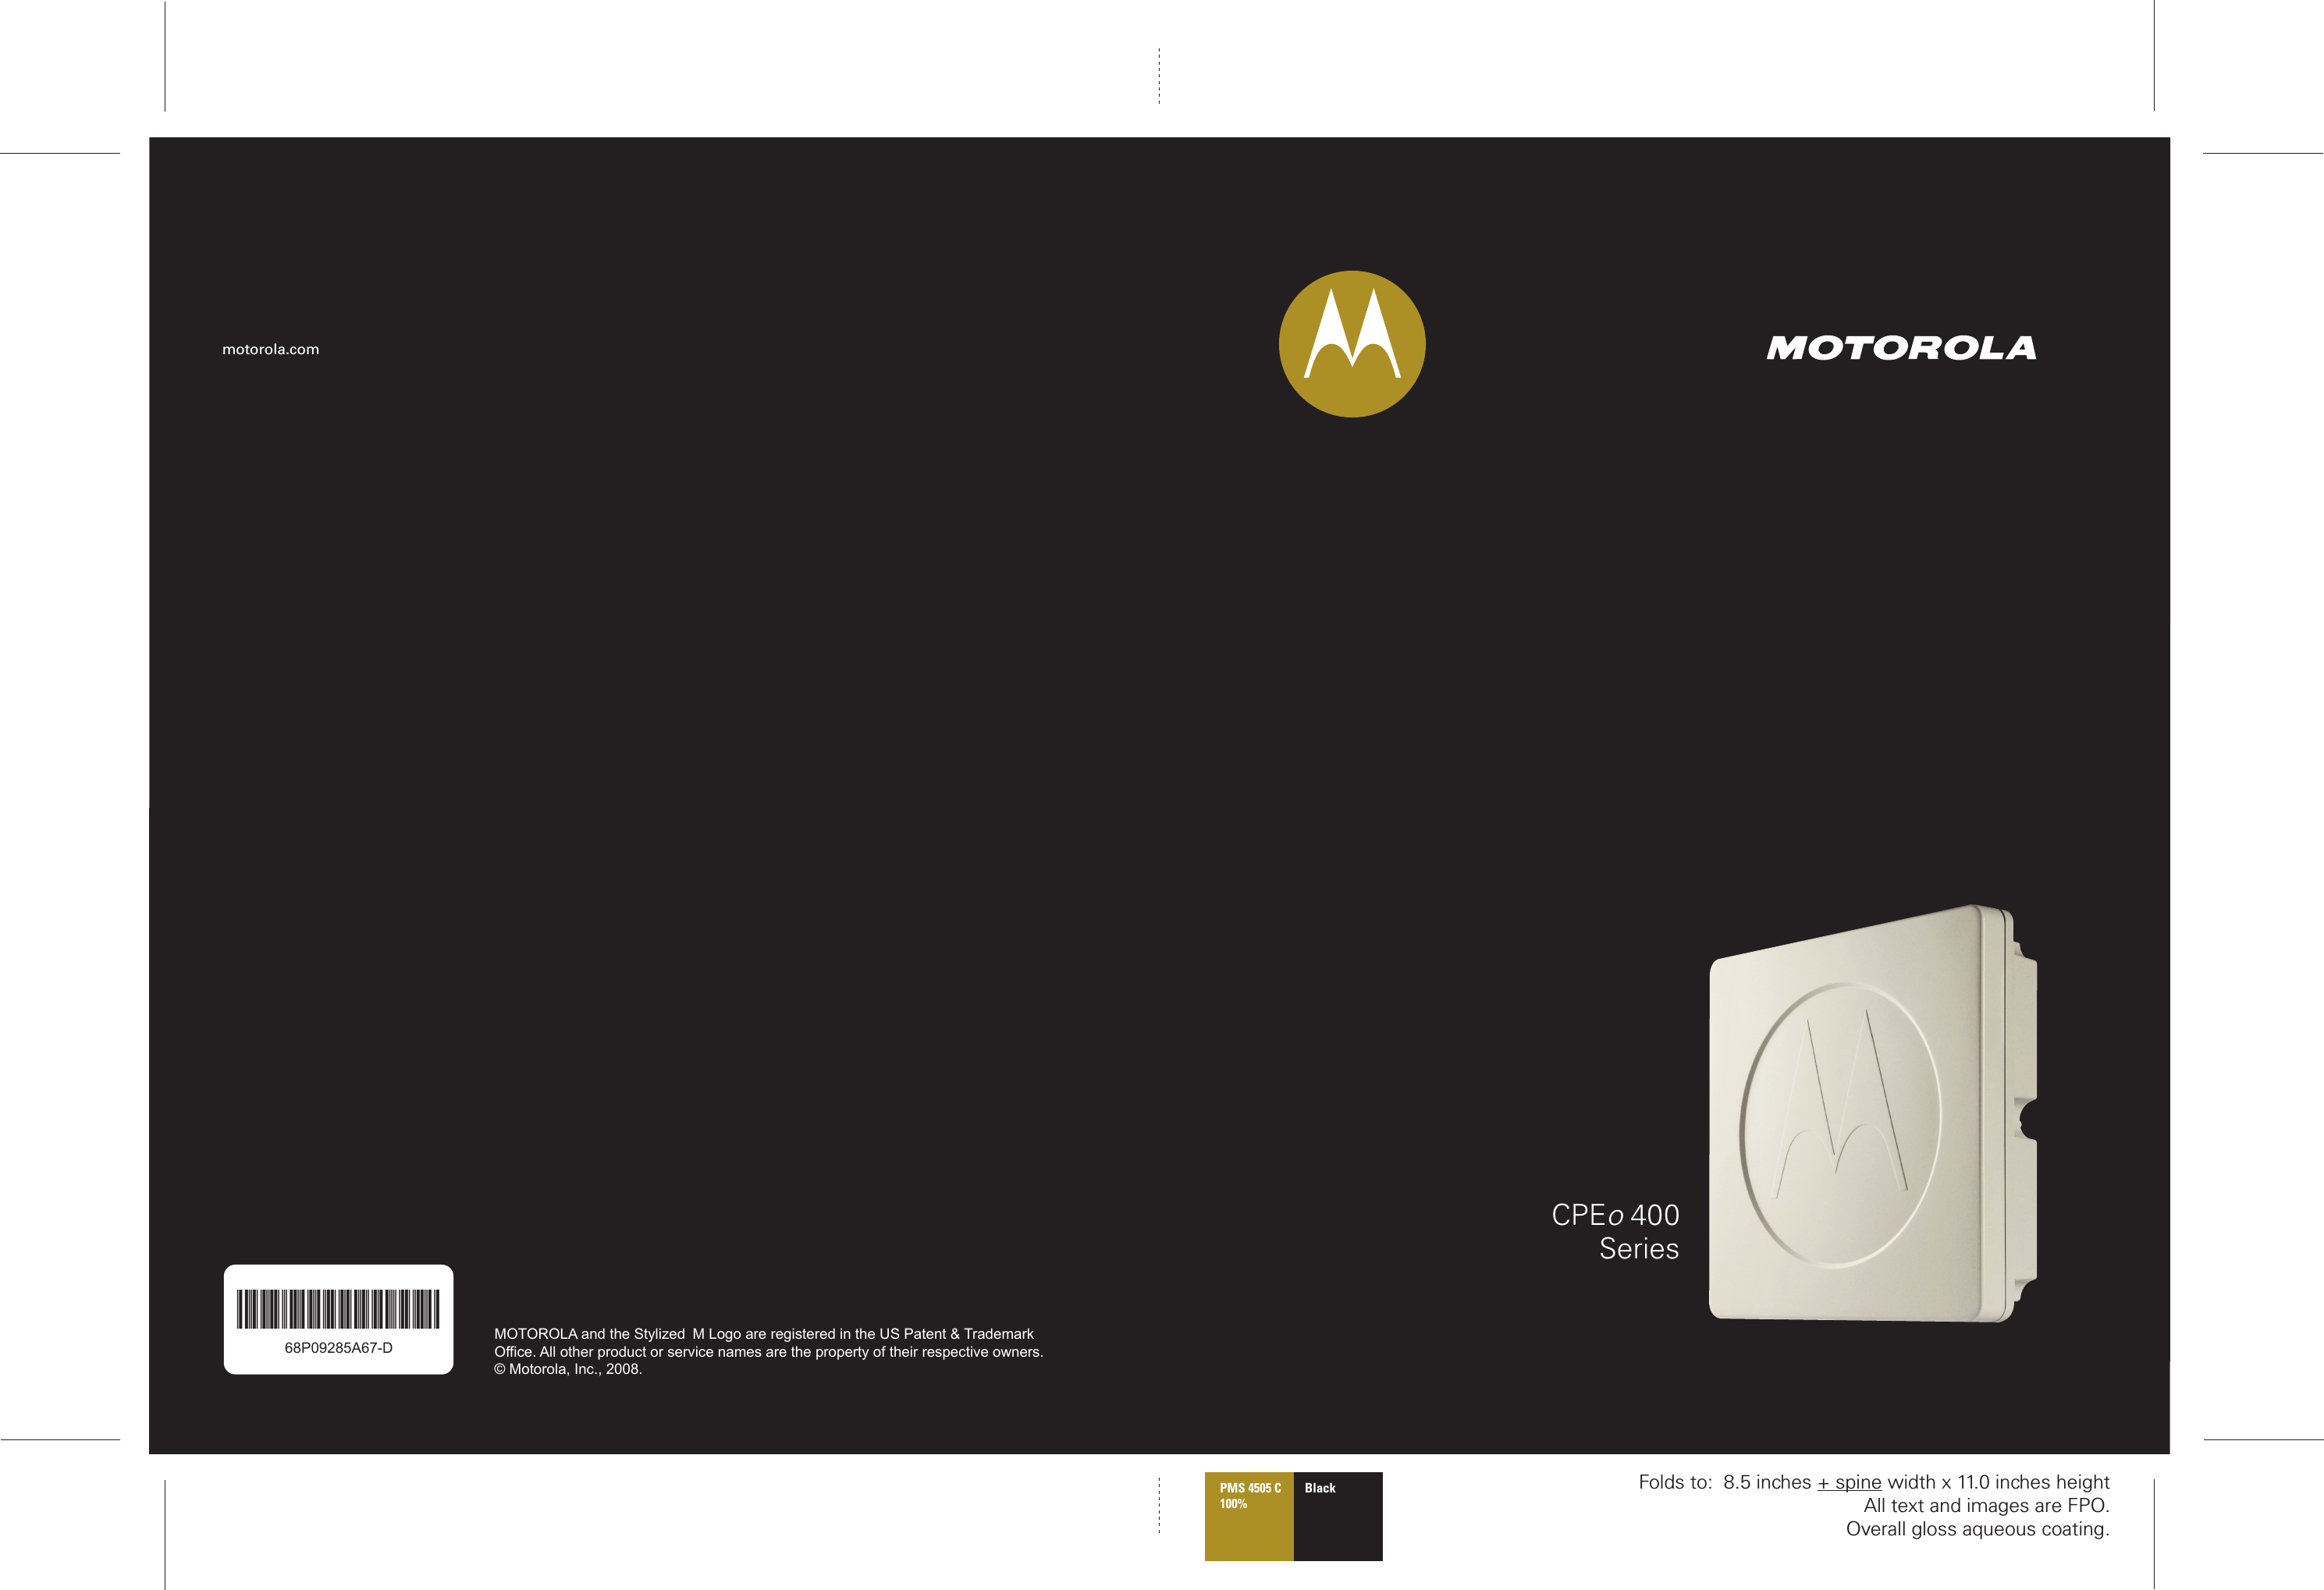 CPEo 400Seriesmotorola.com68P09285A67-D68P09285A67-DMOTOROLA and the Stylized M Logo are registered in the US Patent &amp; Trademark Office. All other product or service names are the property of their respective owners.© Motorola, Inc., 2008.Best_L2R_V -- PC Version Folds to:  8.5 inches + spine width x 11.0 inches heightAll text and images are FPO.Overall gloss aqueous coating.PMS 4505 C100%Black 